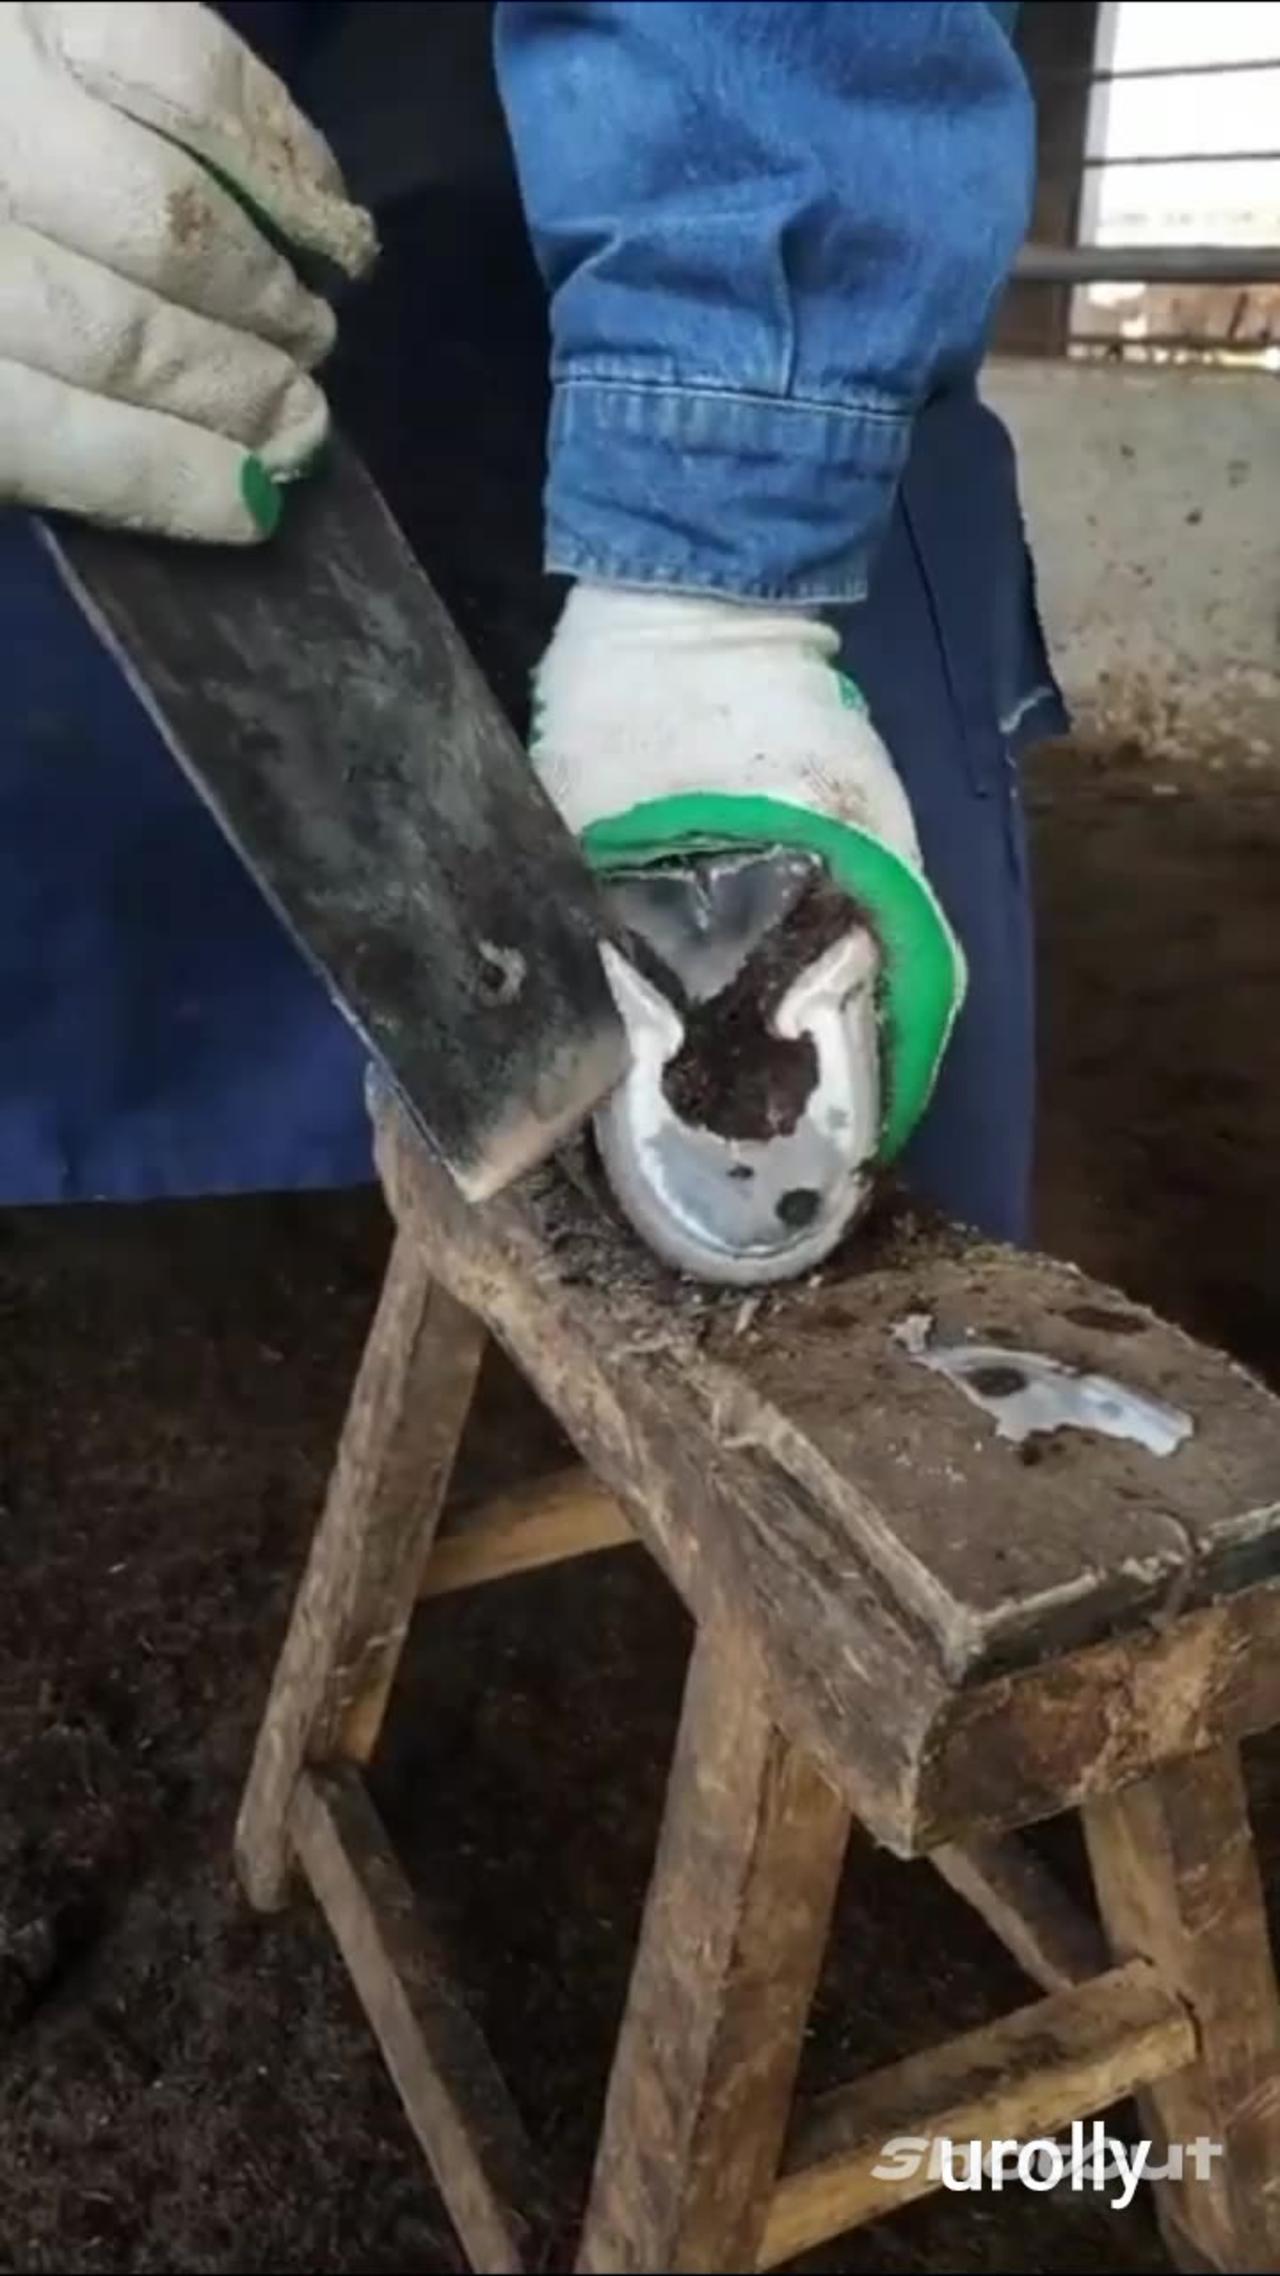 Treating Hoof of a cow suffering from overgrown untreated hoof.